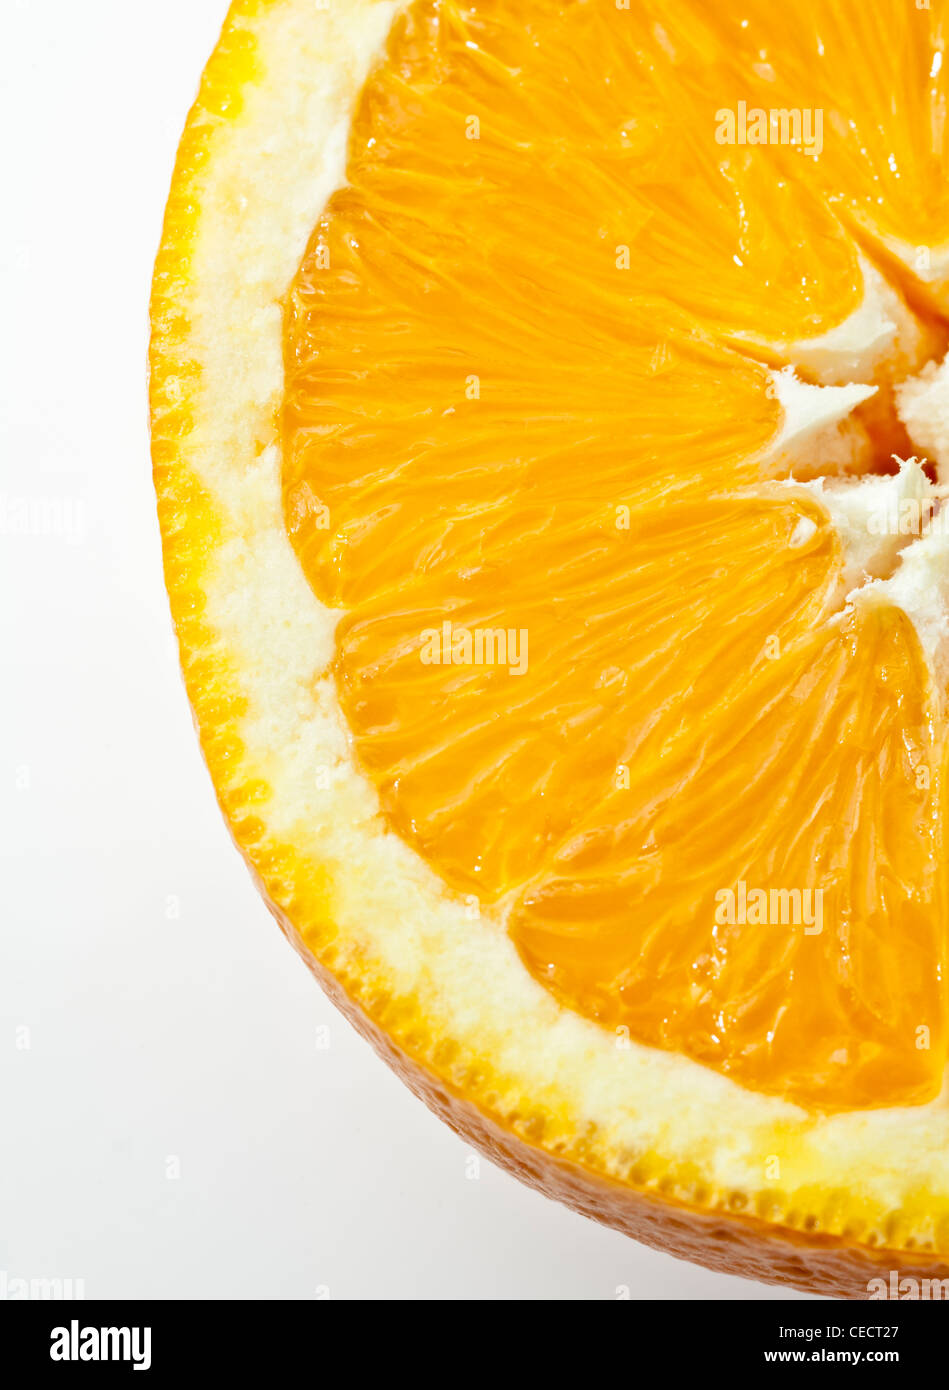 Close-up of half an orange on a plate Stock Photo